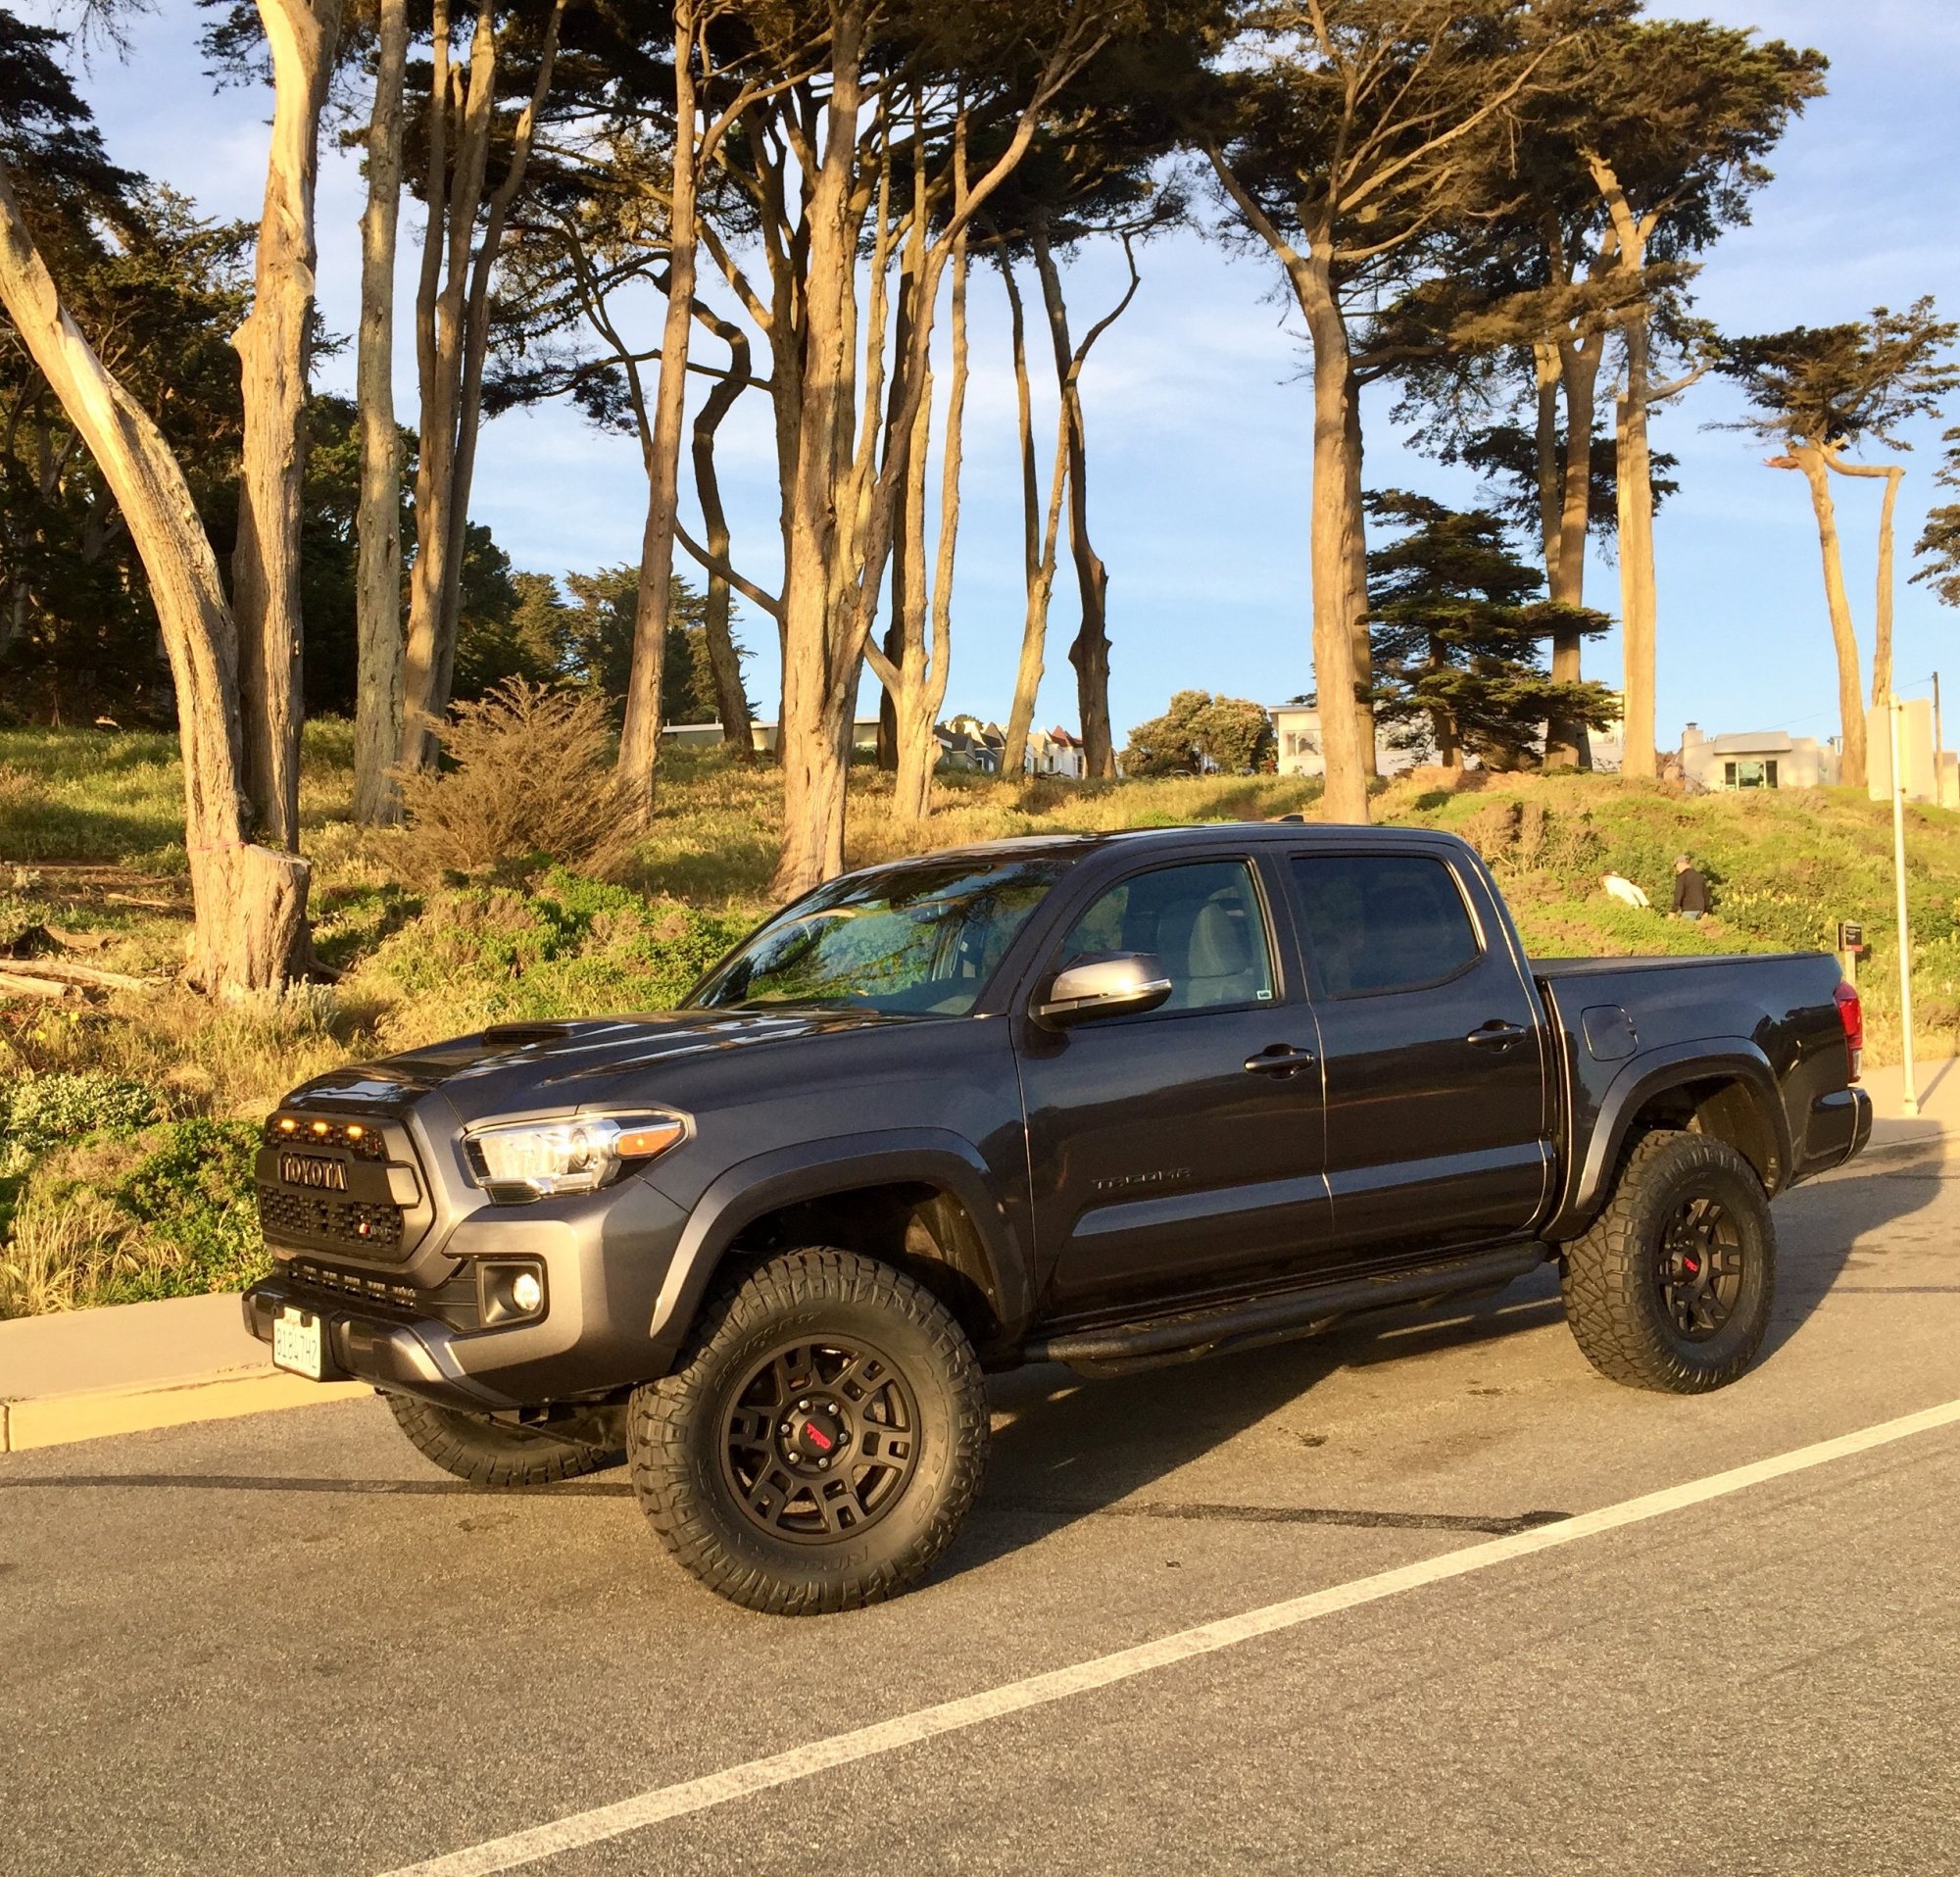 Suspension 2 3 Inch Lift And Tire Size 3rd Gen Toyota Tacoma Forum Tacoma3g Com